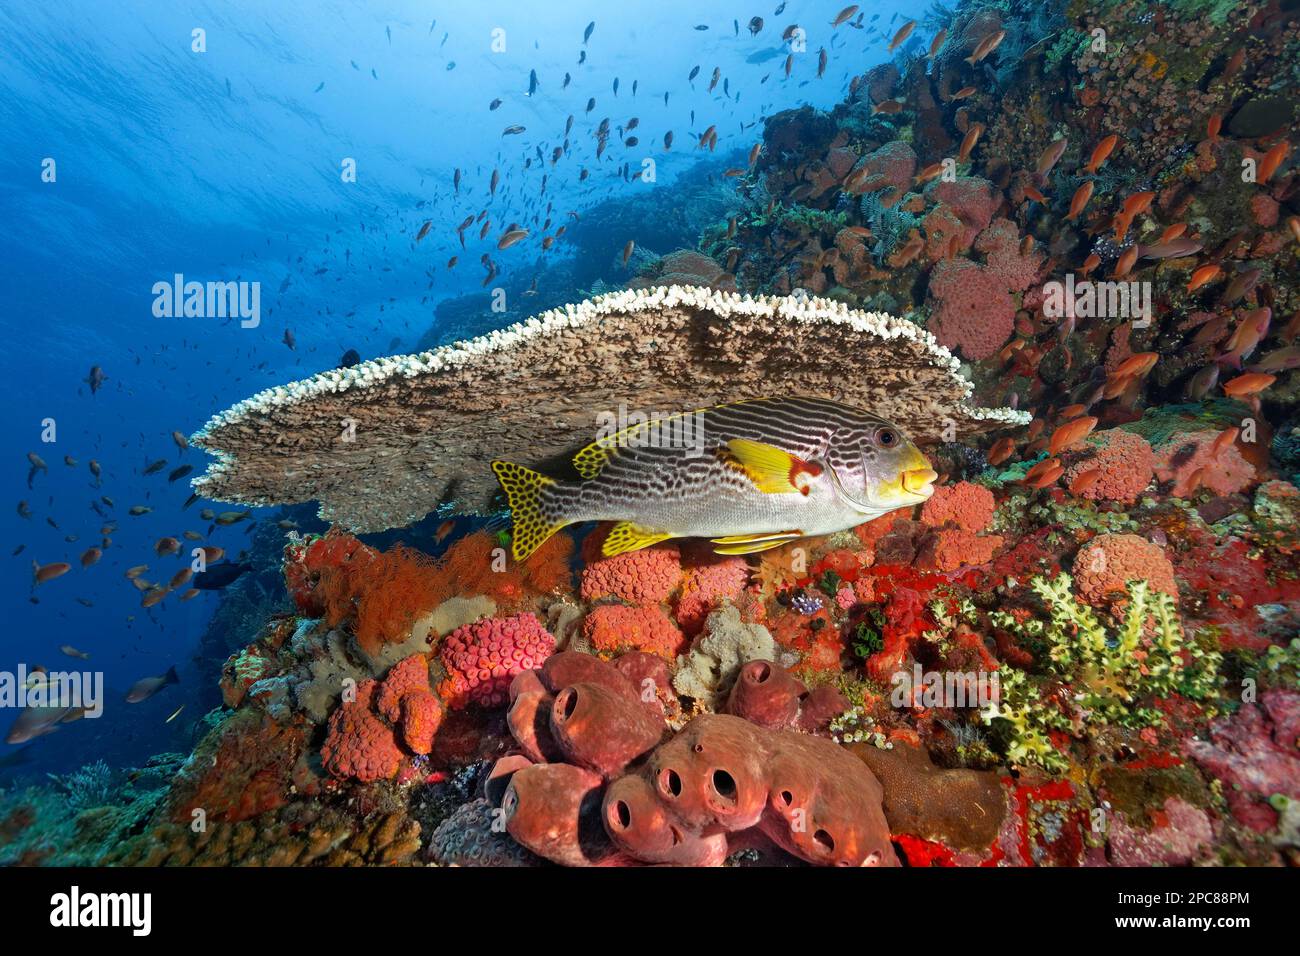 Diagonal-banded sweetlip (Plectorhinchus lineatus) seeking shelter under Acropora table coral (Acroporidae) on coral reef drop-off with sponges Stock Photo